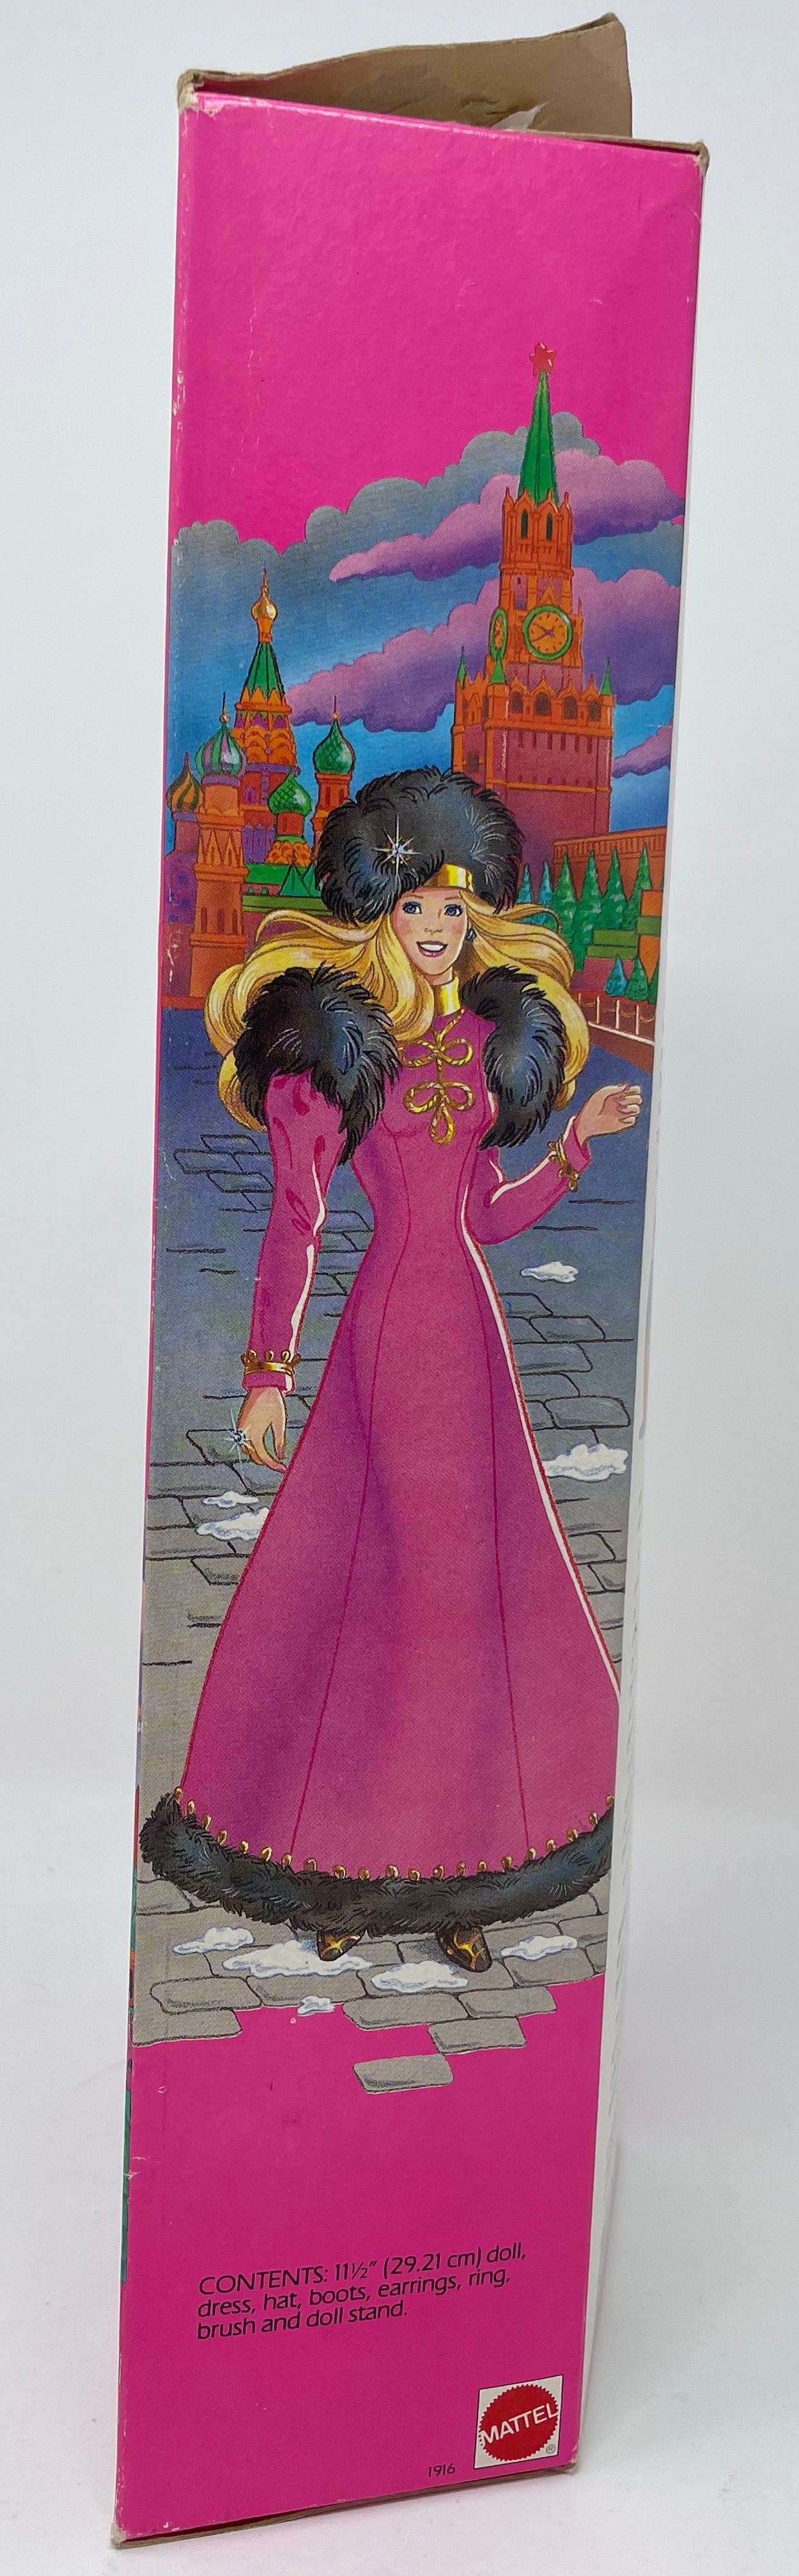 BARBIE - RUSSIAN BARBIE - DOLLS OF THE WORLD COLLECTION - MATTEL 1988